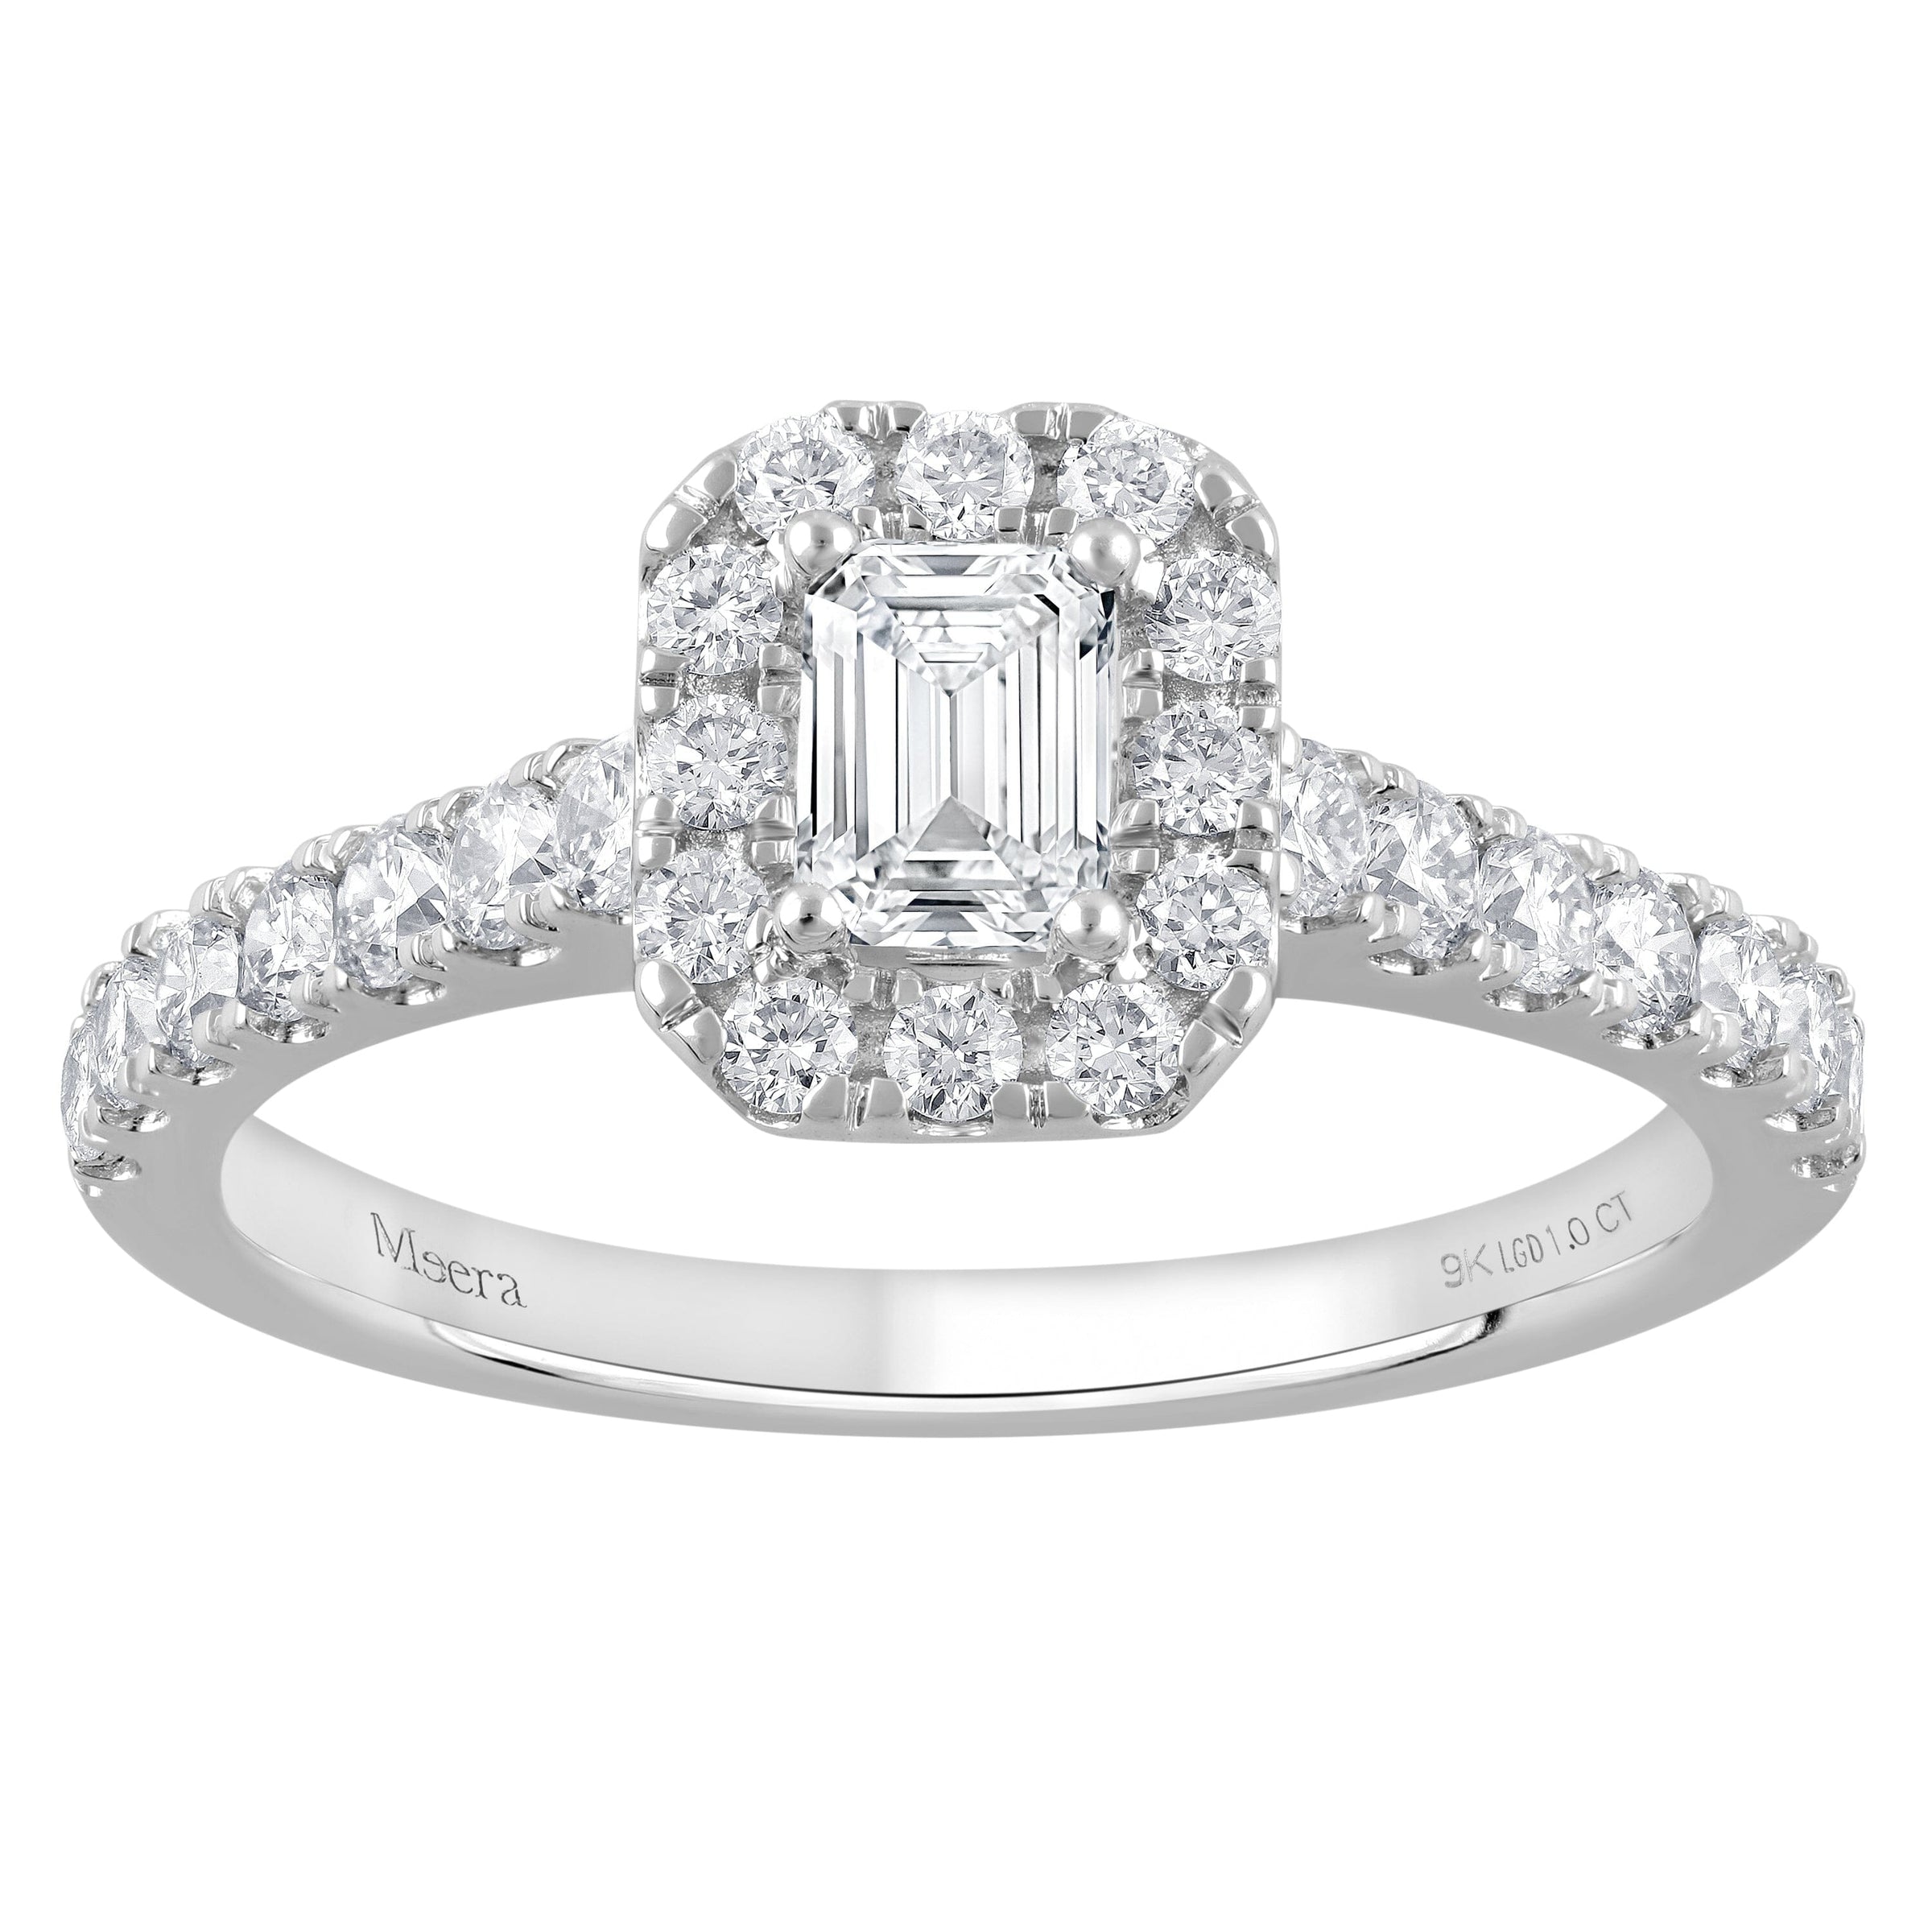 Meera Emerald Cut Solitaire Ring with 1.00ct of Laboratory Grown Diamonds in 9ct White Gold Rings Bevilles 